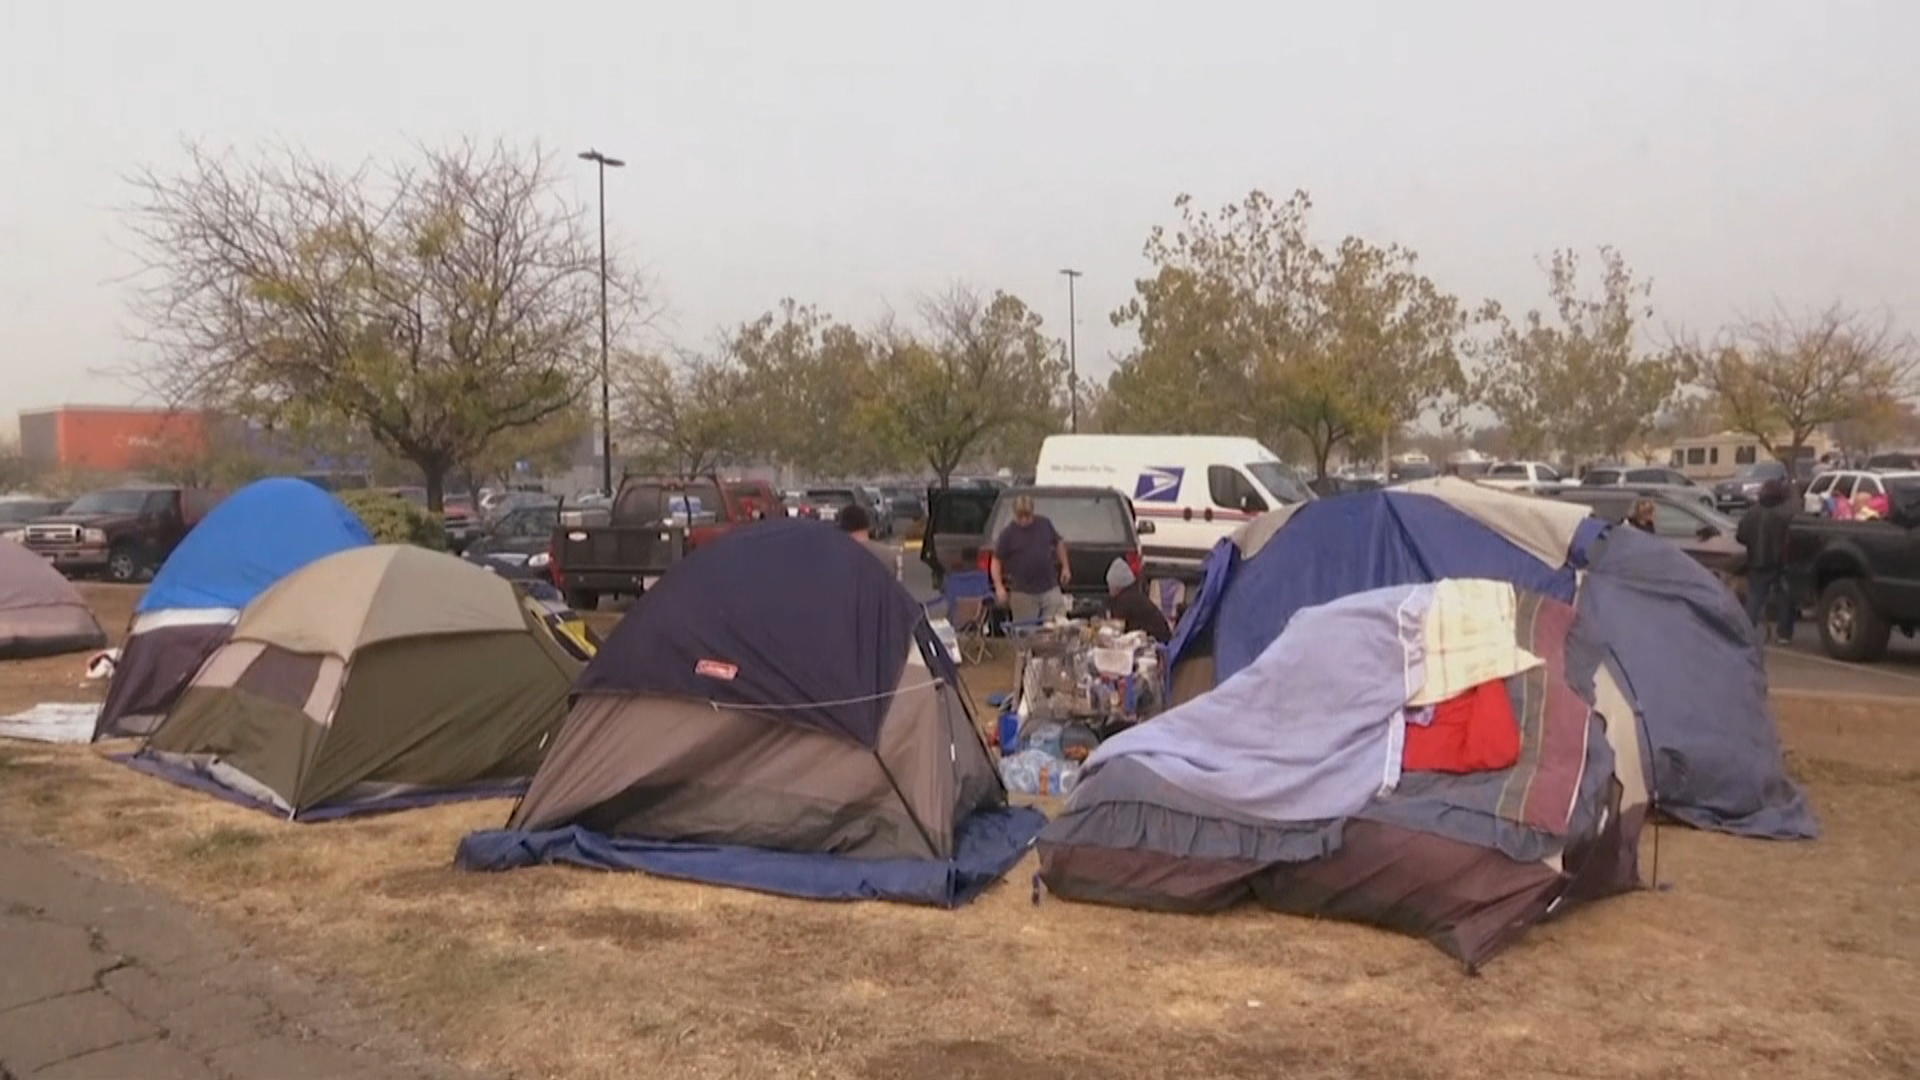 With nowhere to go, wildfire evacuees set up camp in Walmart parking ...